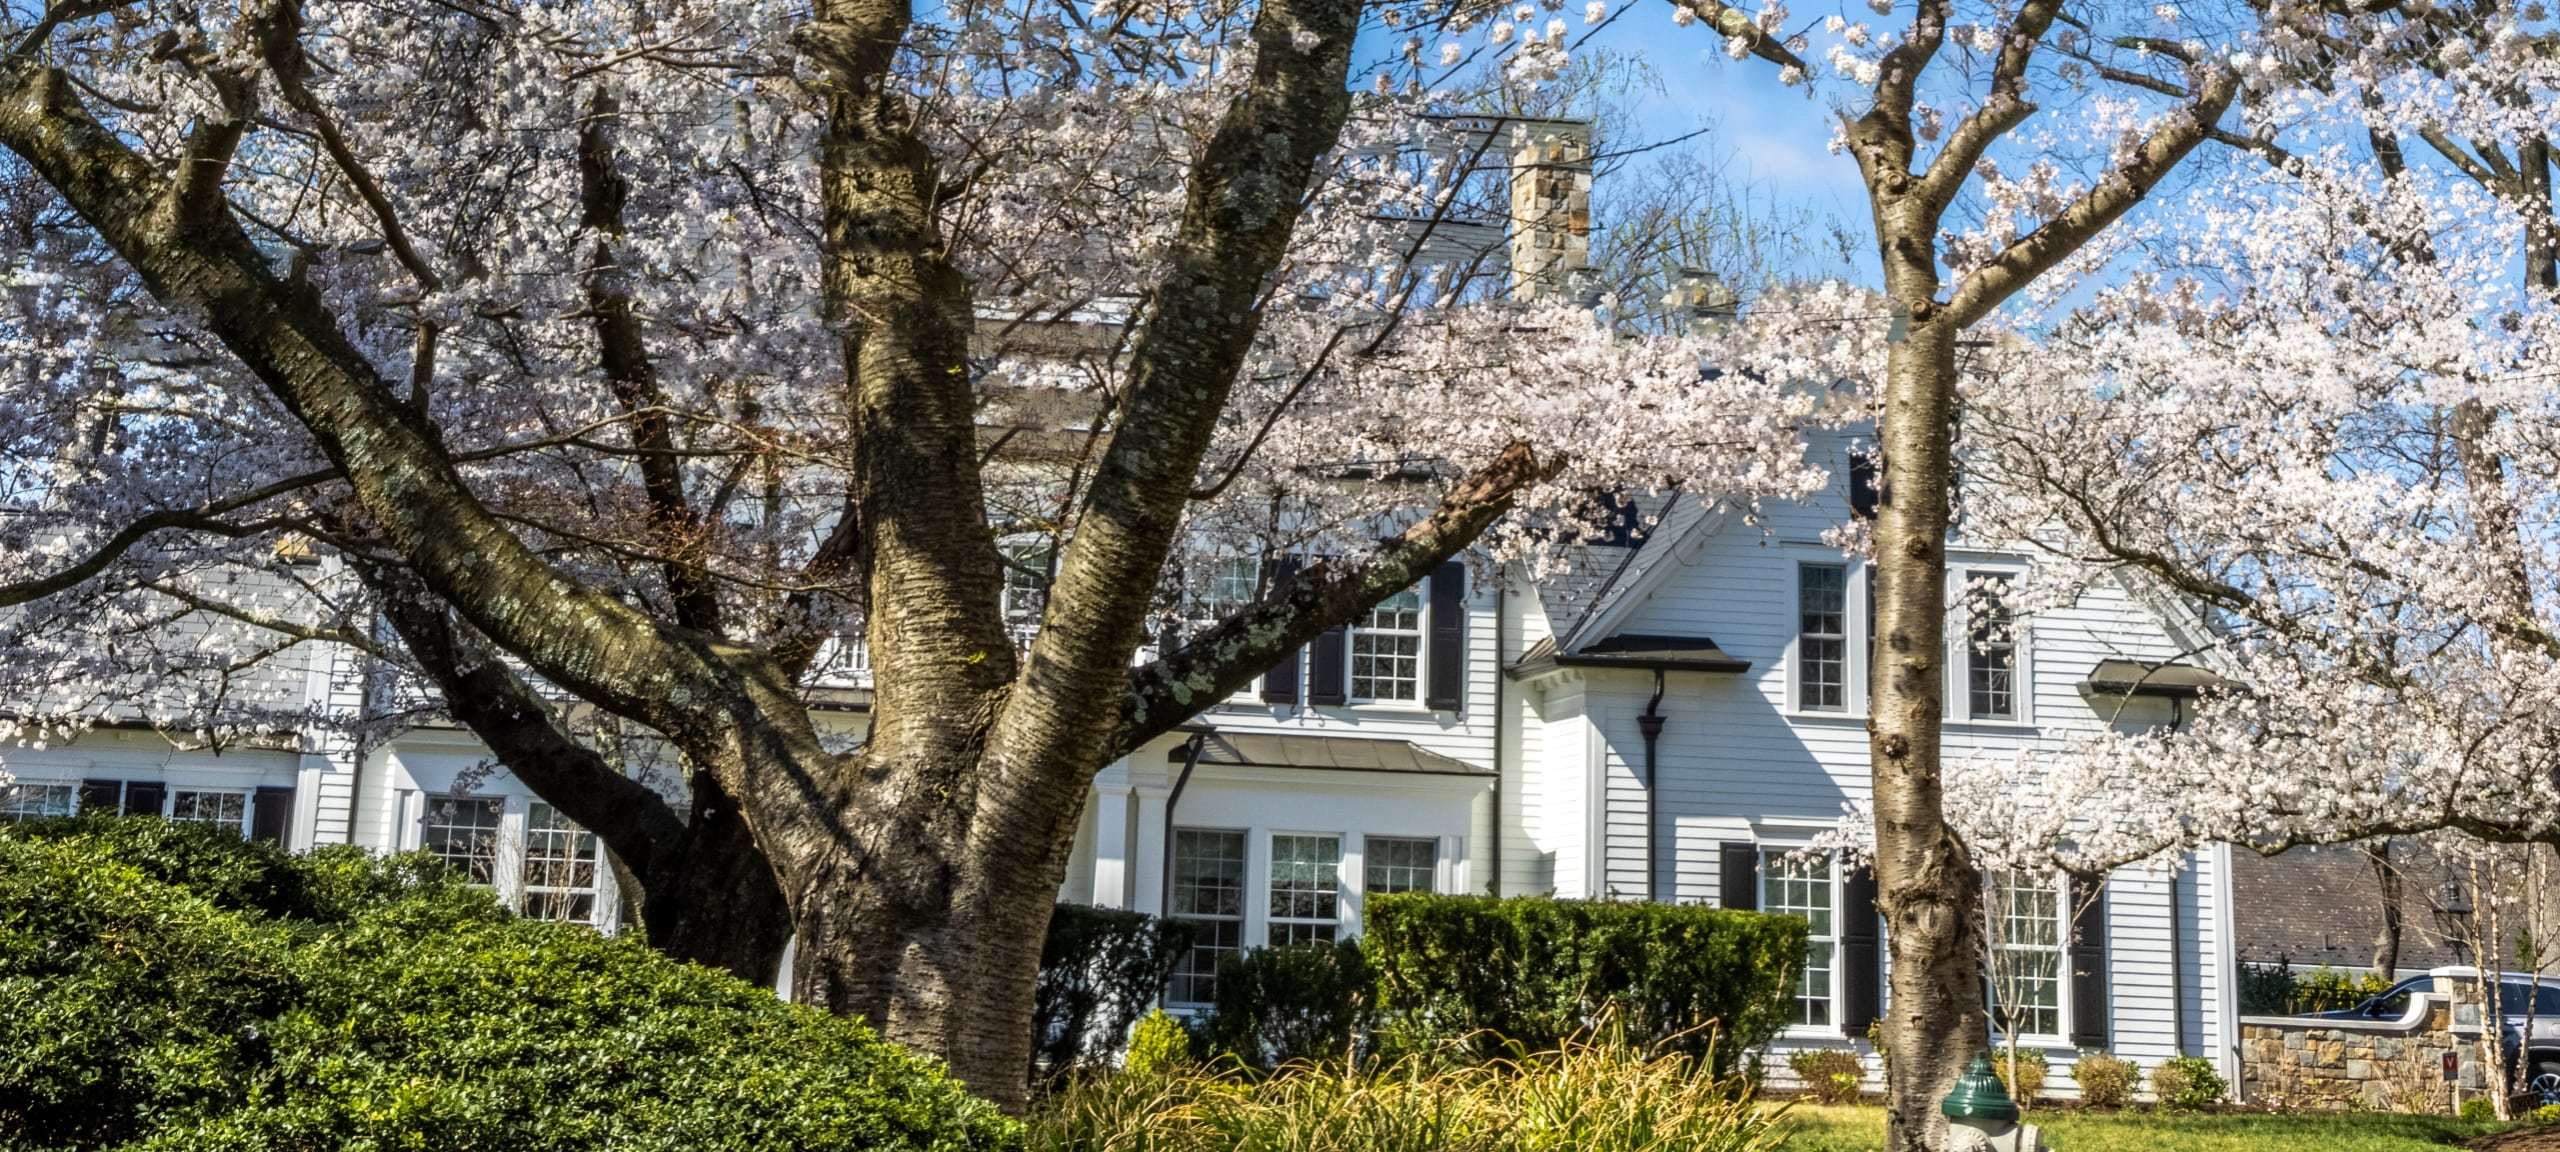 Cherry blossom trees in front of luxury Bethesda home, Maryland